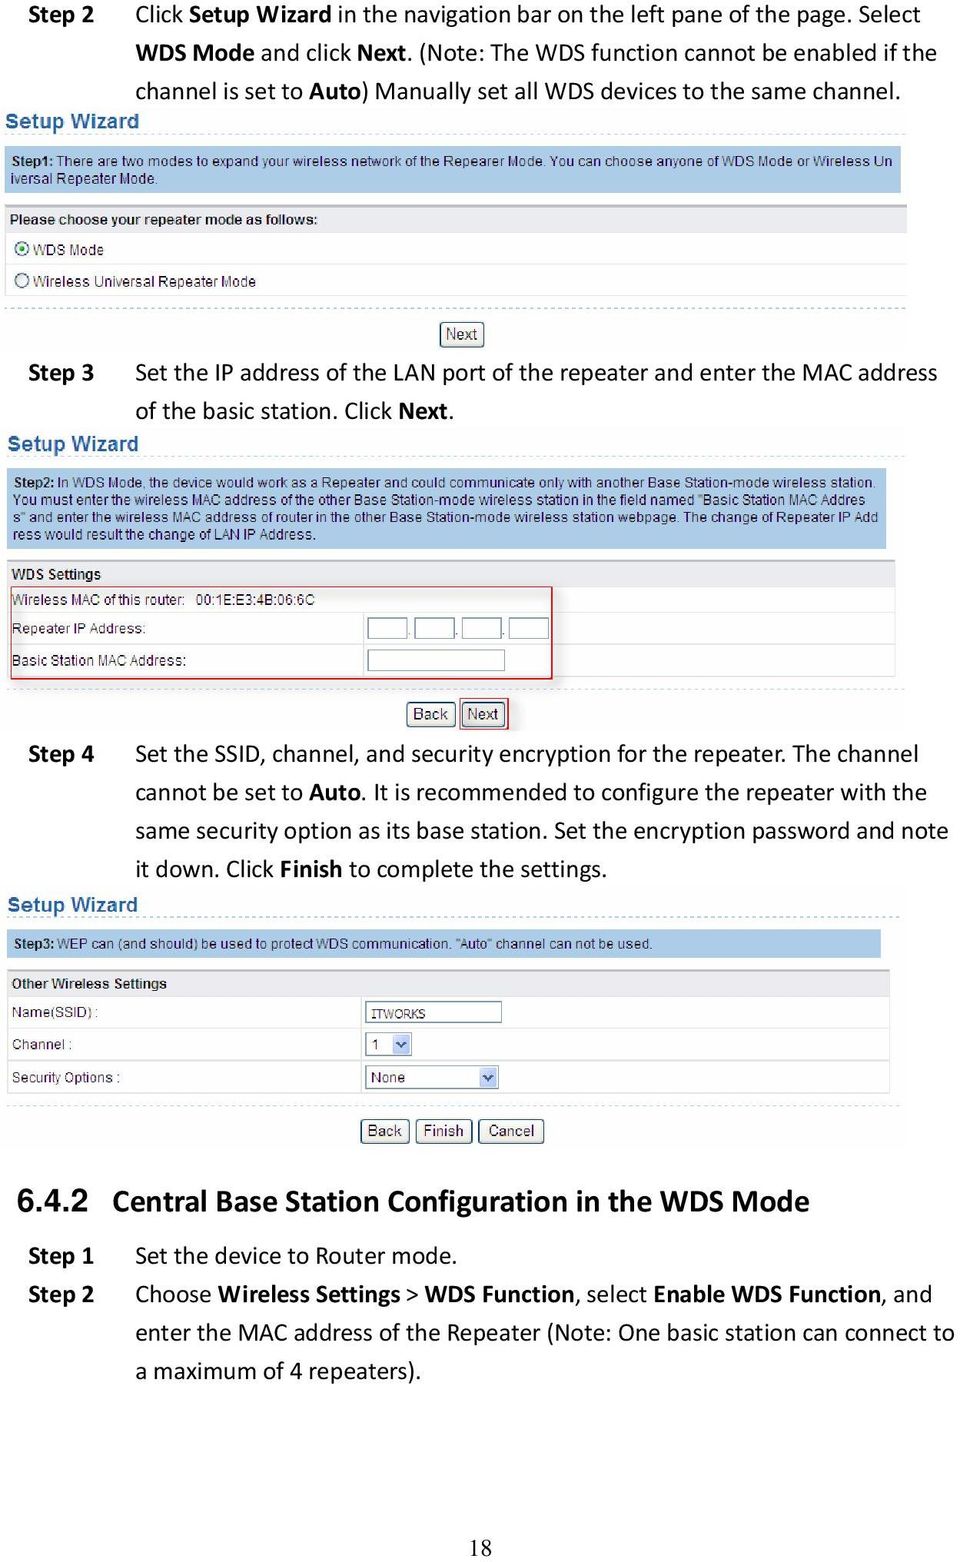 Step 3 Set the IP address of the LAN port of the repeater and enter the MAC address of the basic station. Click Next. Step 4 Set the SSID, channel, and security encryption for the repeater.